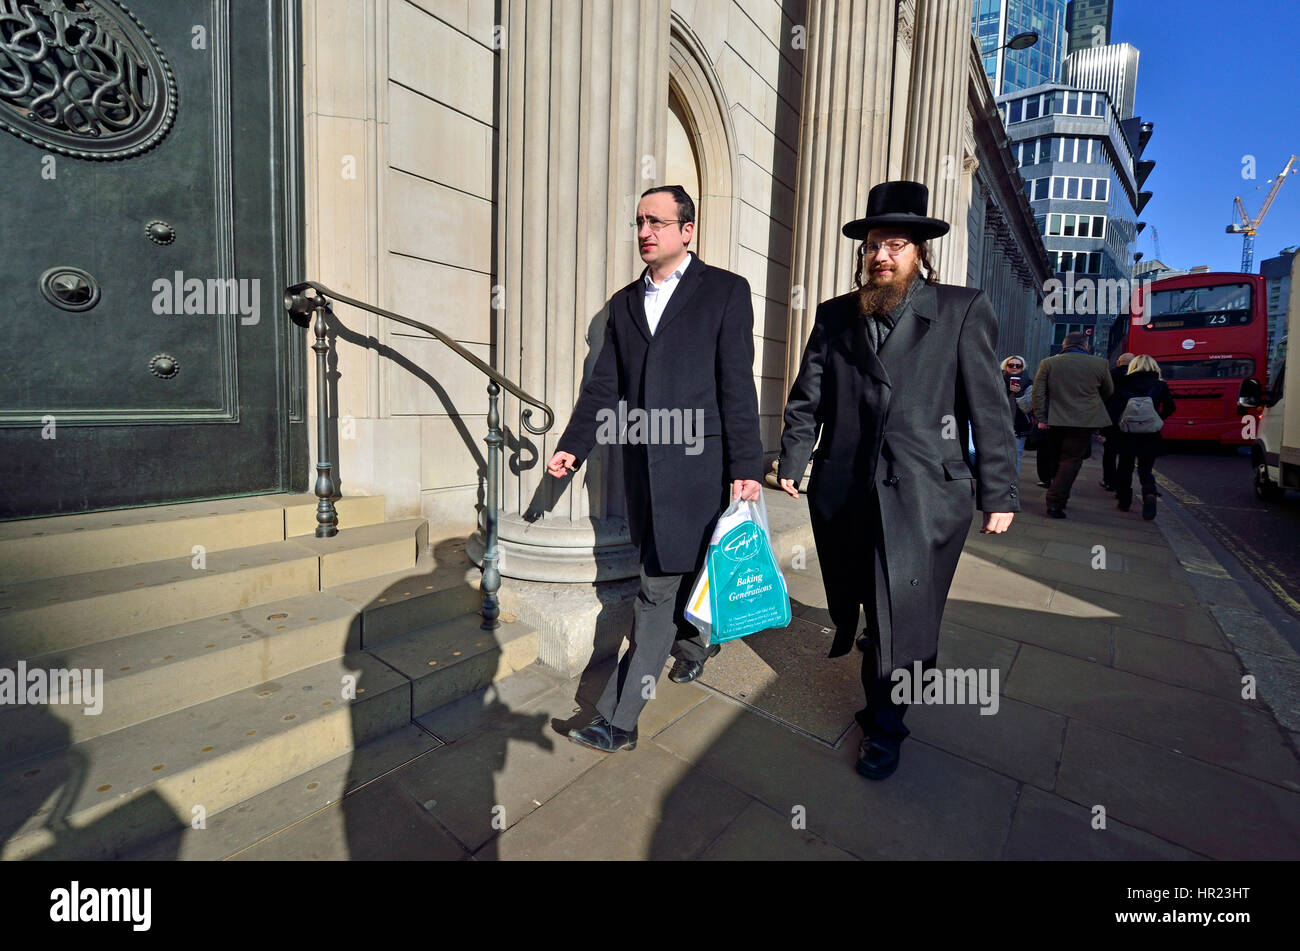 London, England, UK. Two Jewish men by the Bank of England Stock Photo